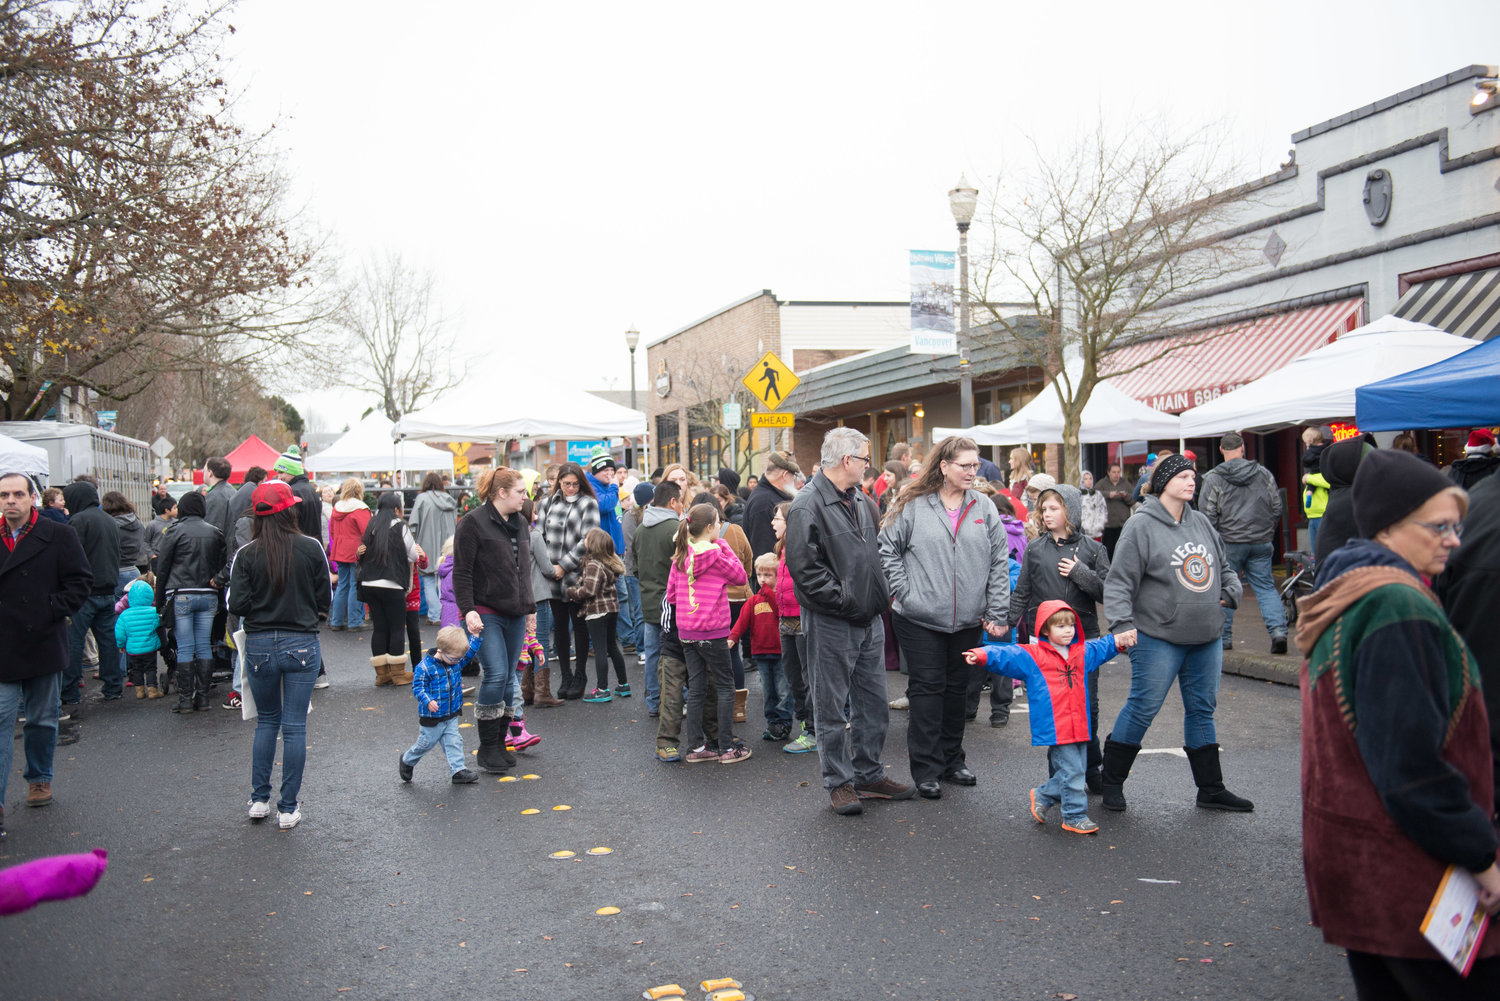 Attendees meander in the closed-off section of Main Street during the 2015 live reindeer Christmas block party at Vancouver’s Uptown Village.